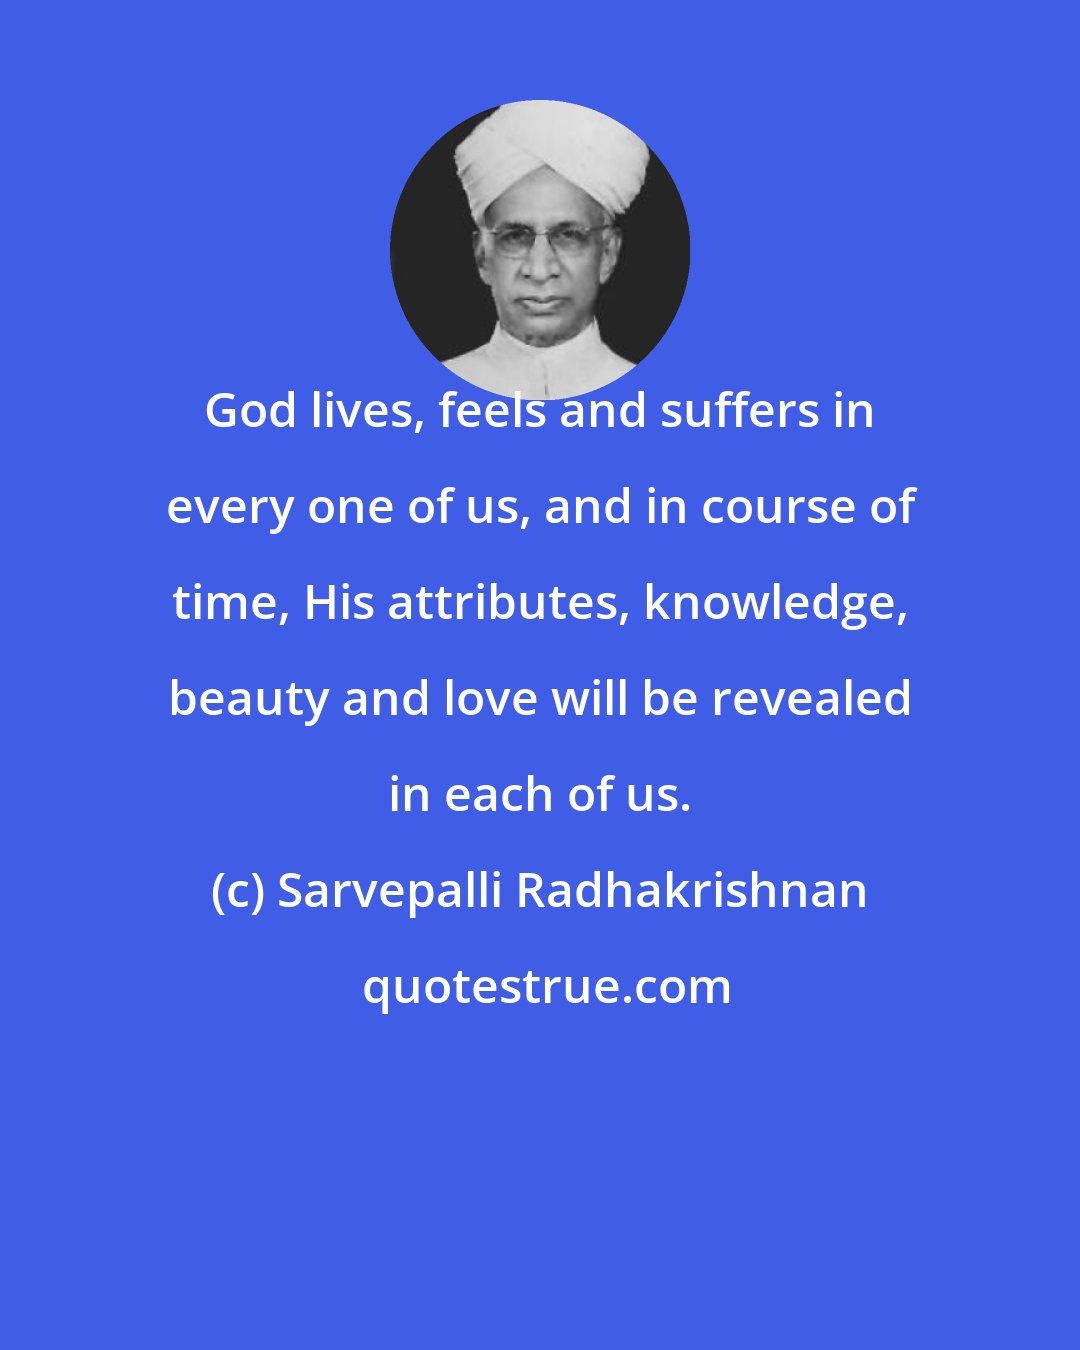 Sarvepalli Radhakrishnan: God lives, feels and suffers in every one of us, and in course of time, His attributes, knowledge, beauty and love will be revealed in each of us.